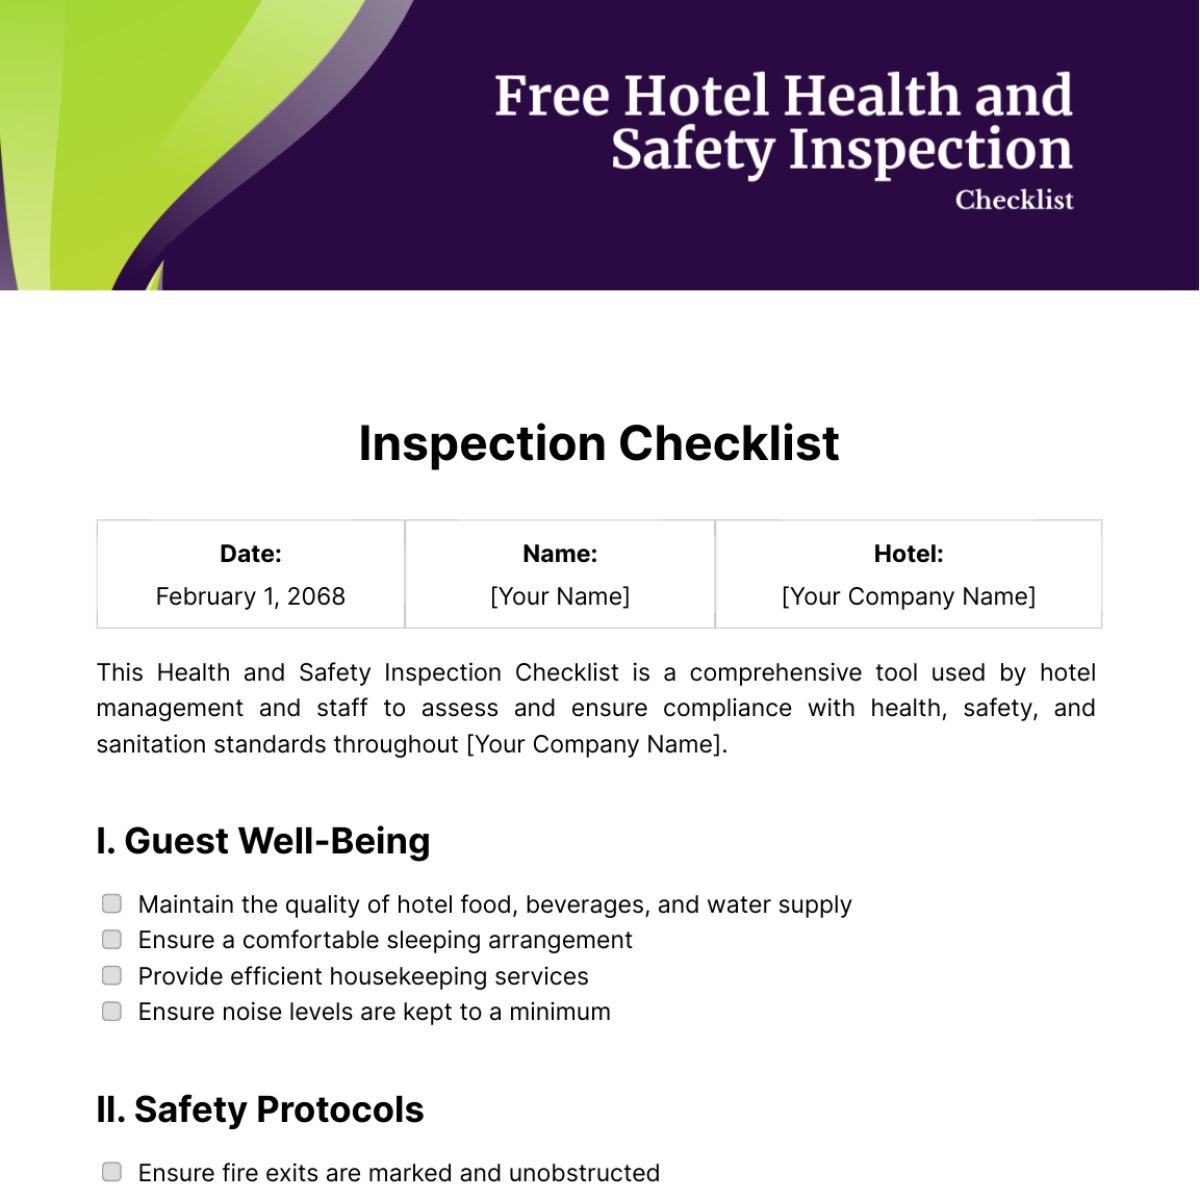 Free Hotel Health and Safety Inspection Checklist Template 